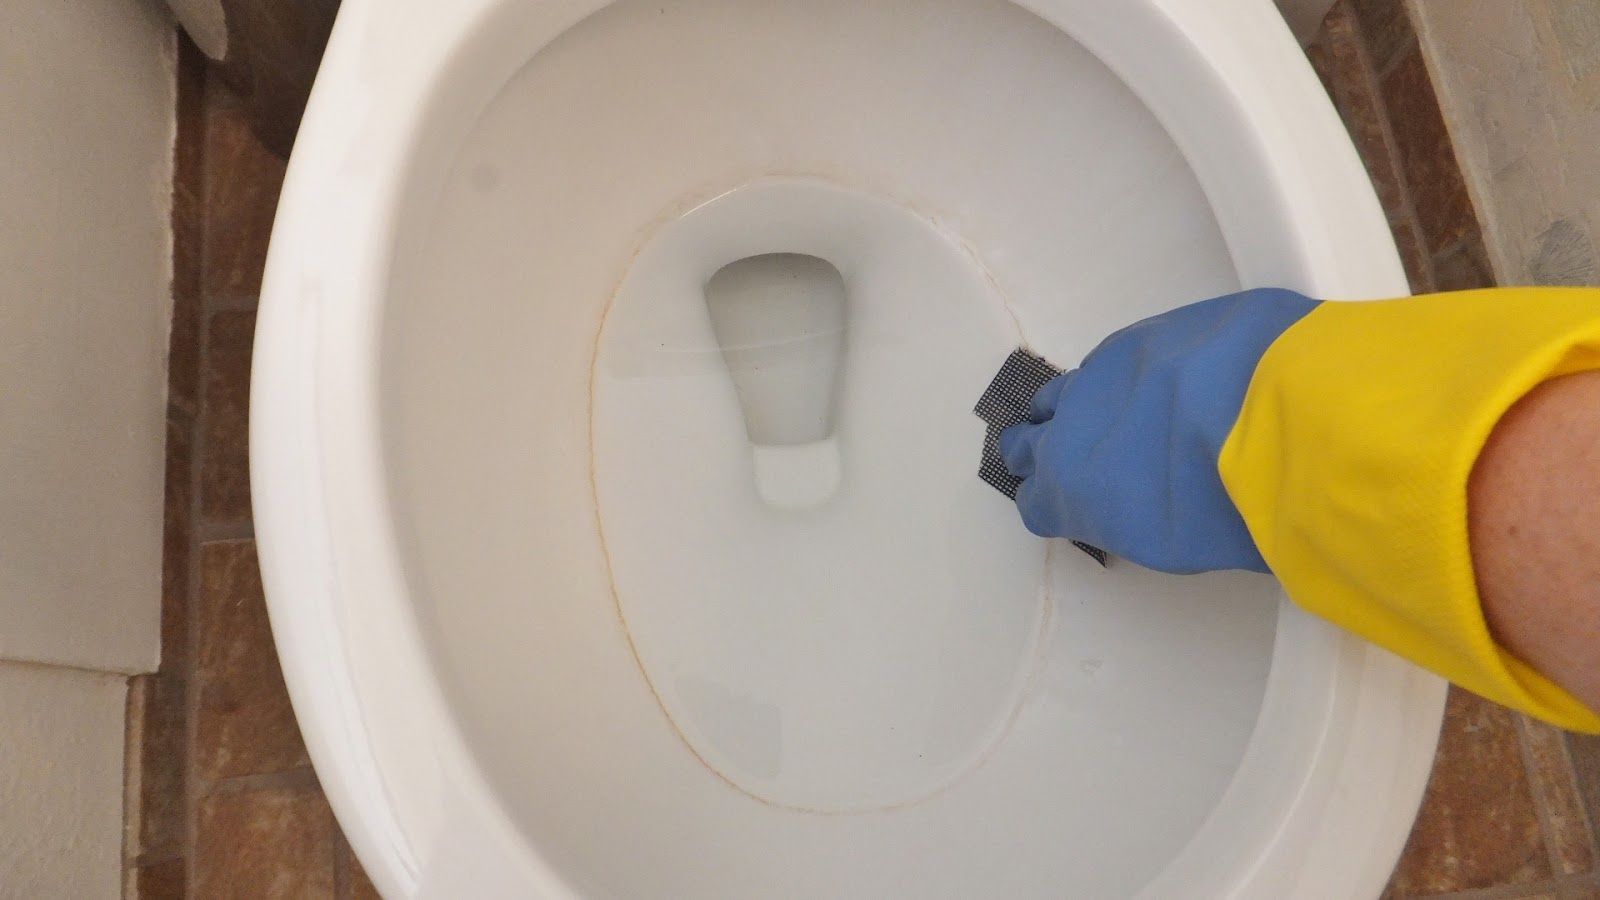 How To Get Ring Stain Out Of Toilet Bowl